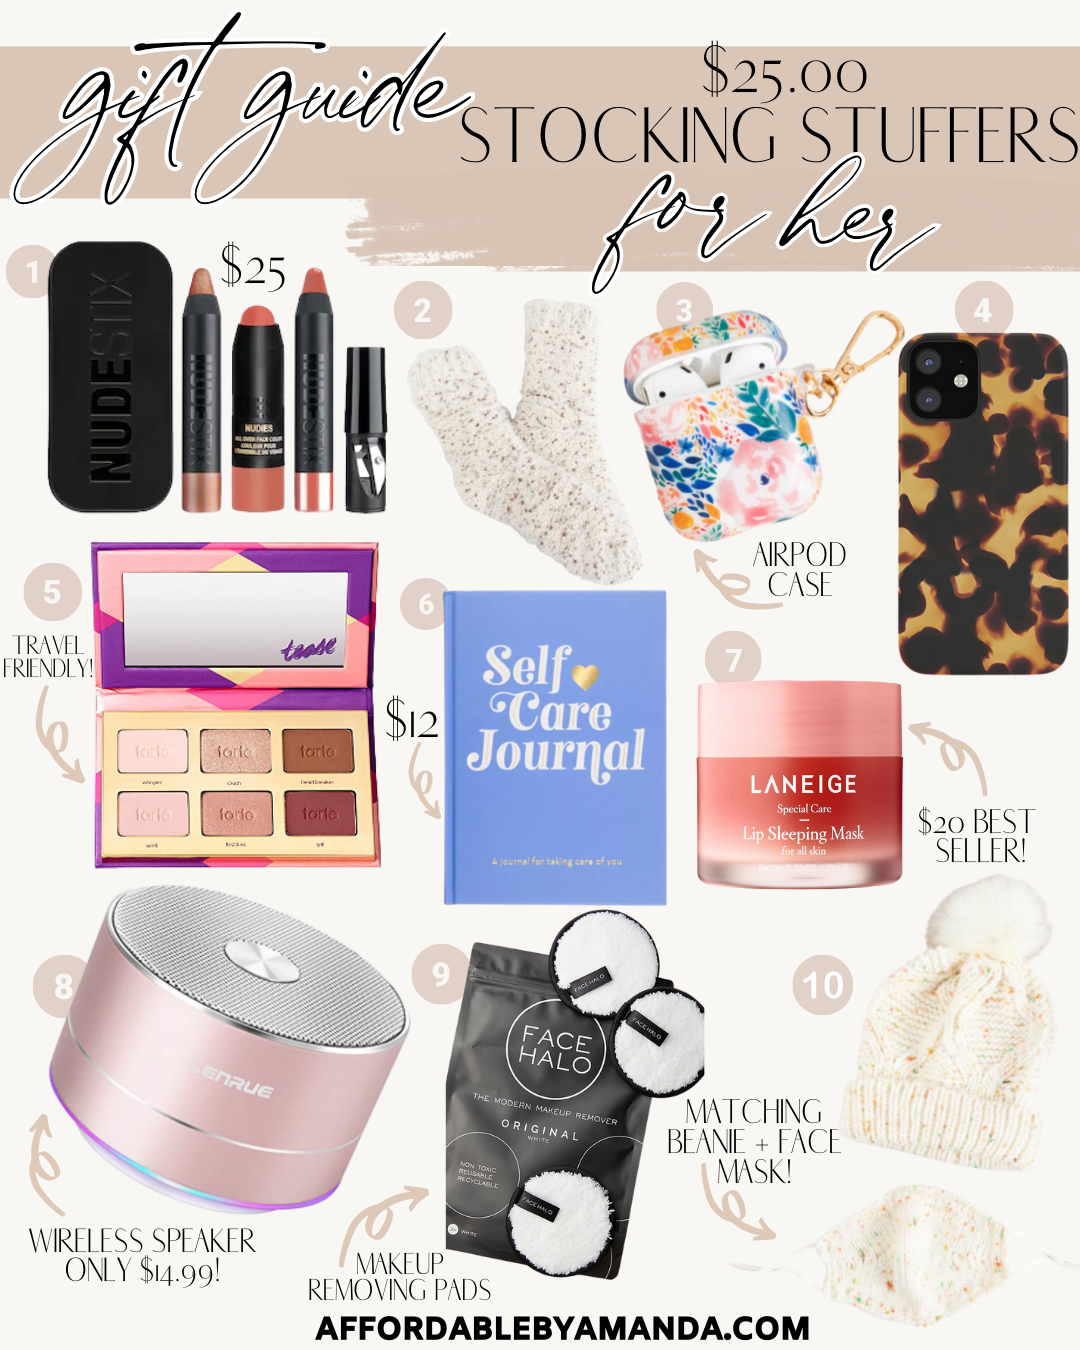 The Best Stocking Stuffers for the Beautiful Women in Your Life